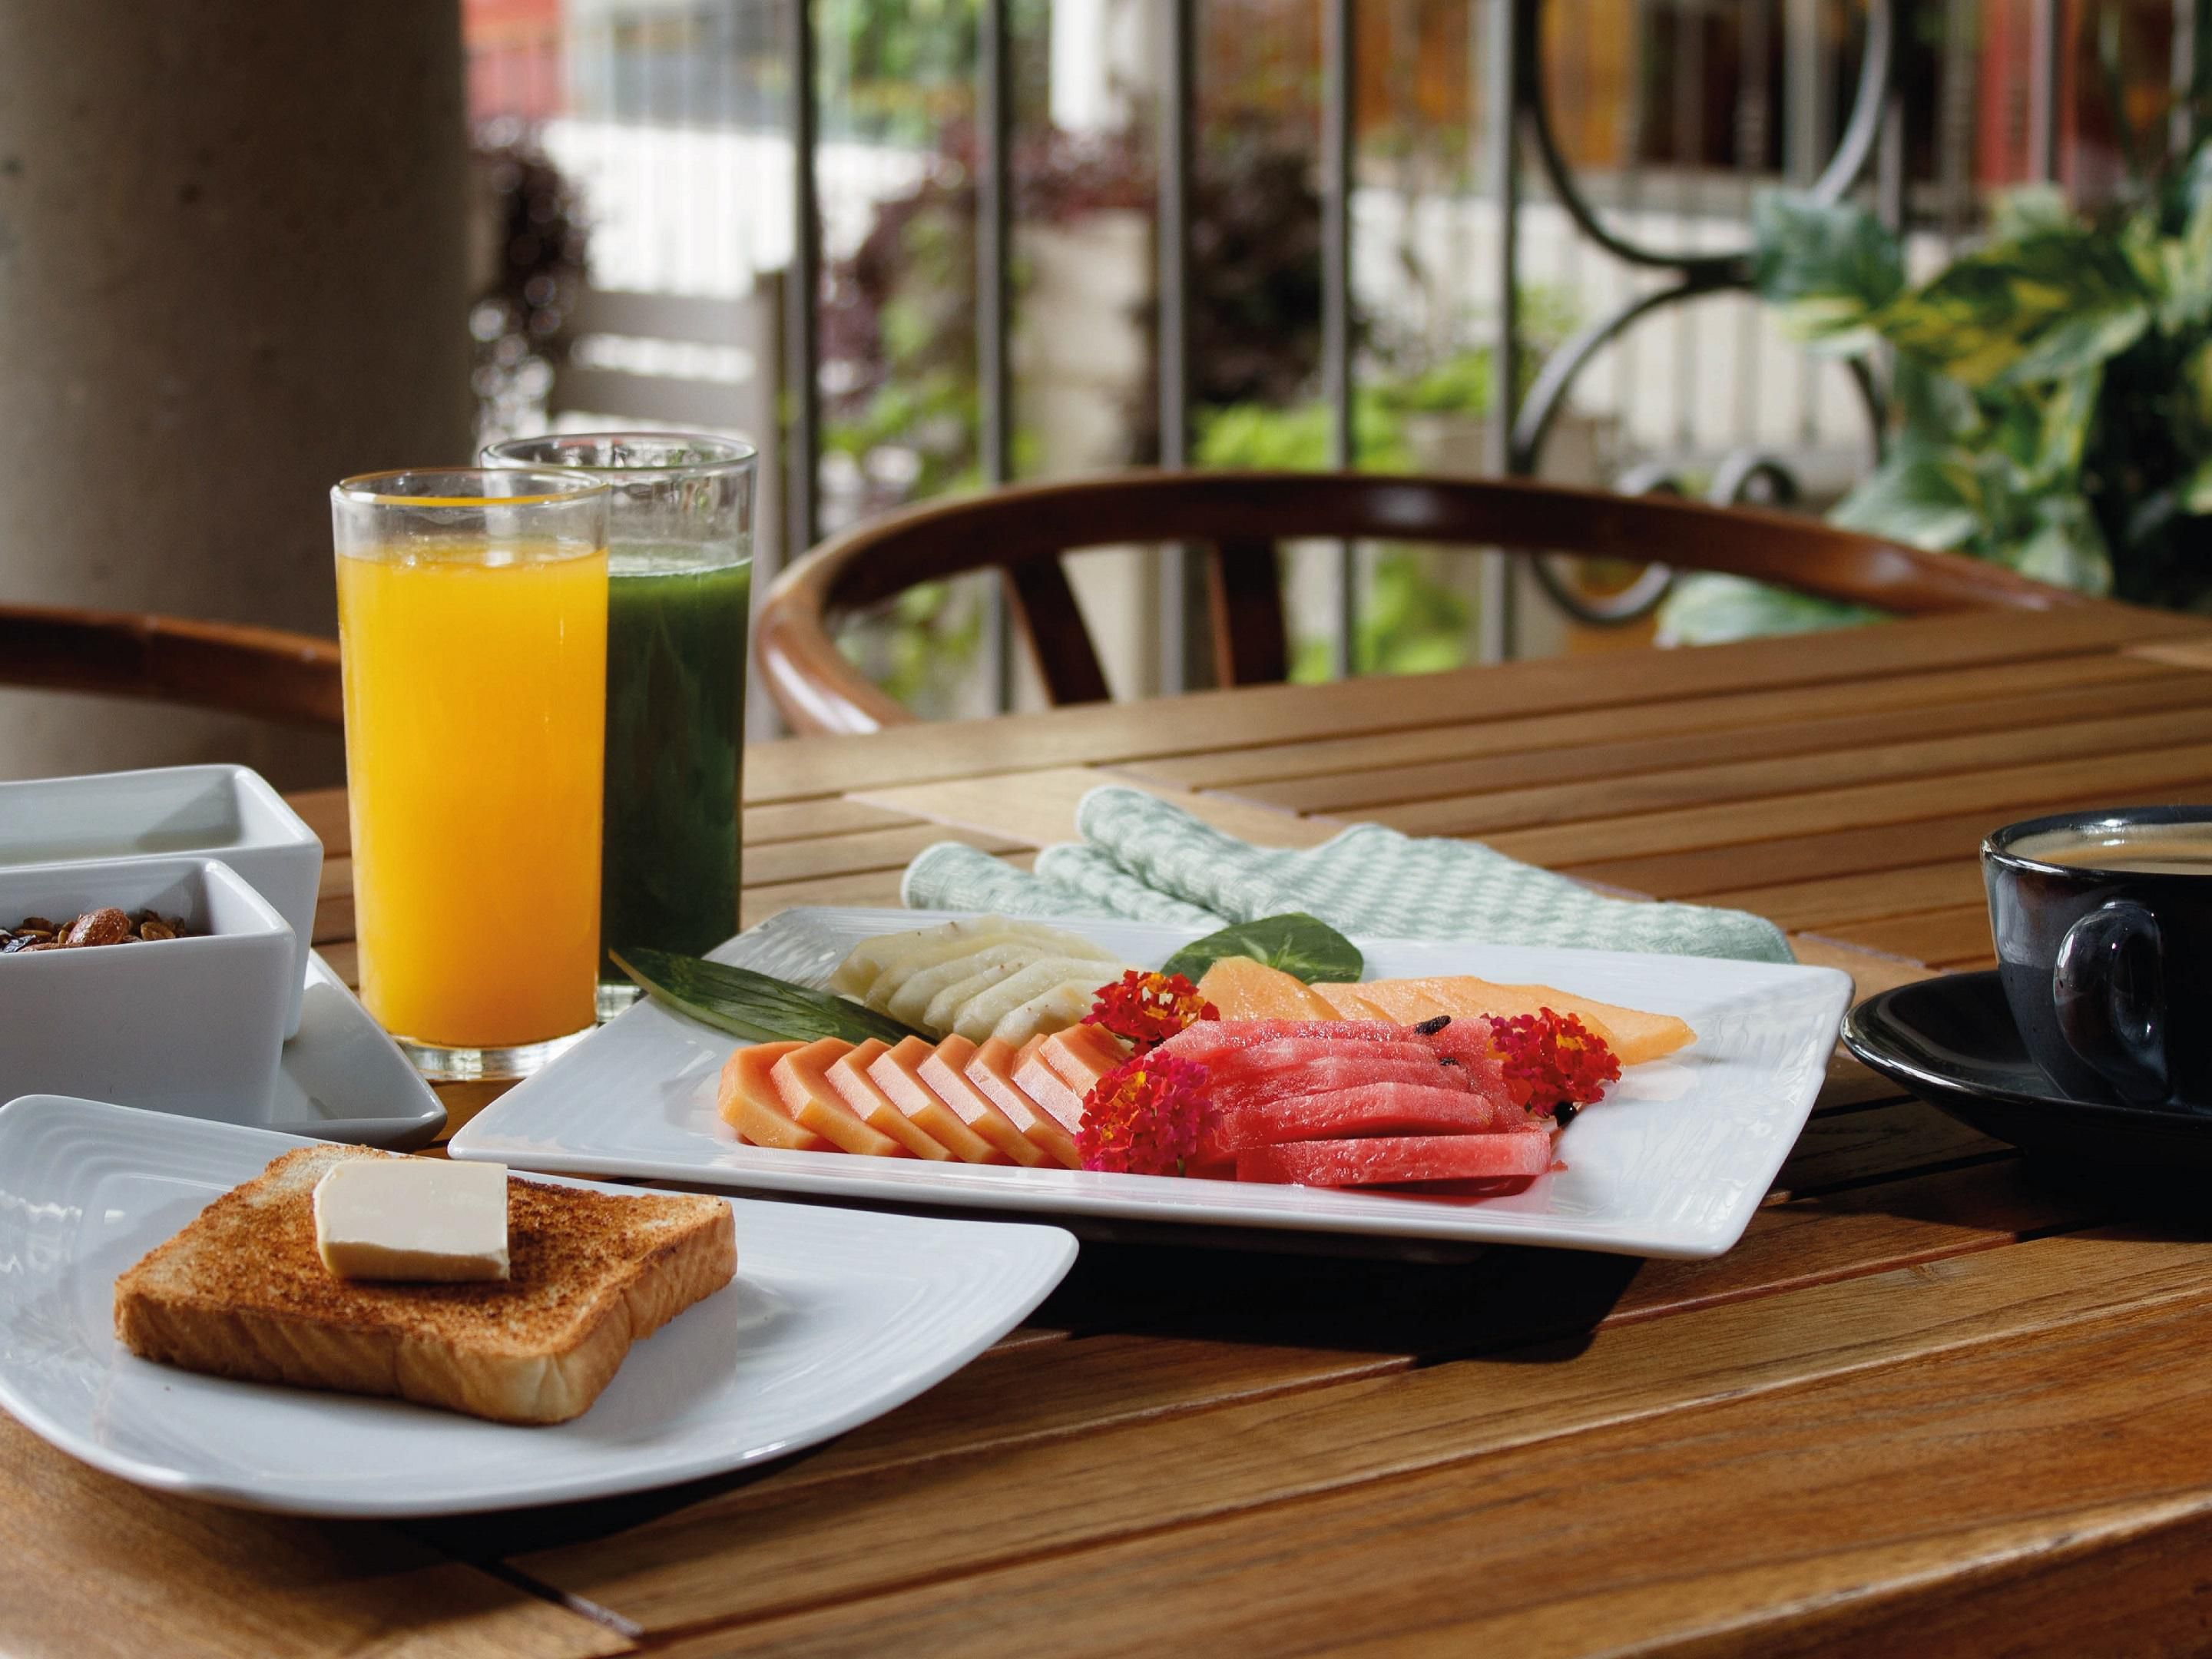 Enjoy a delicious breakfast in our Restaurant Los Ameyales, with a lot of options for all the family.